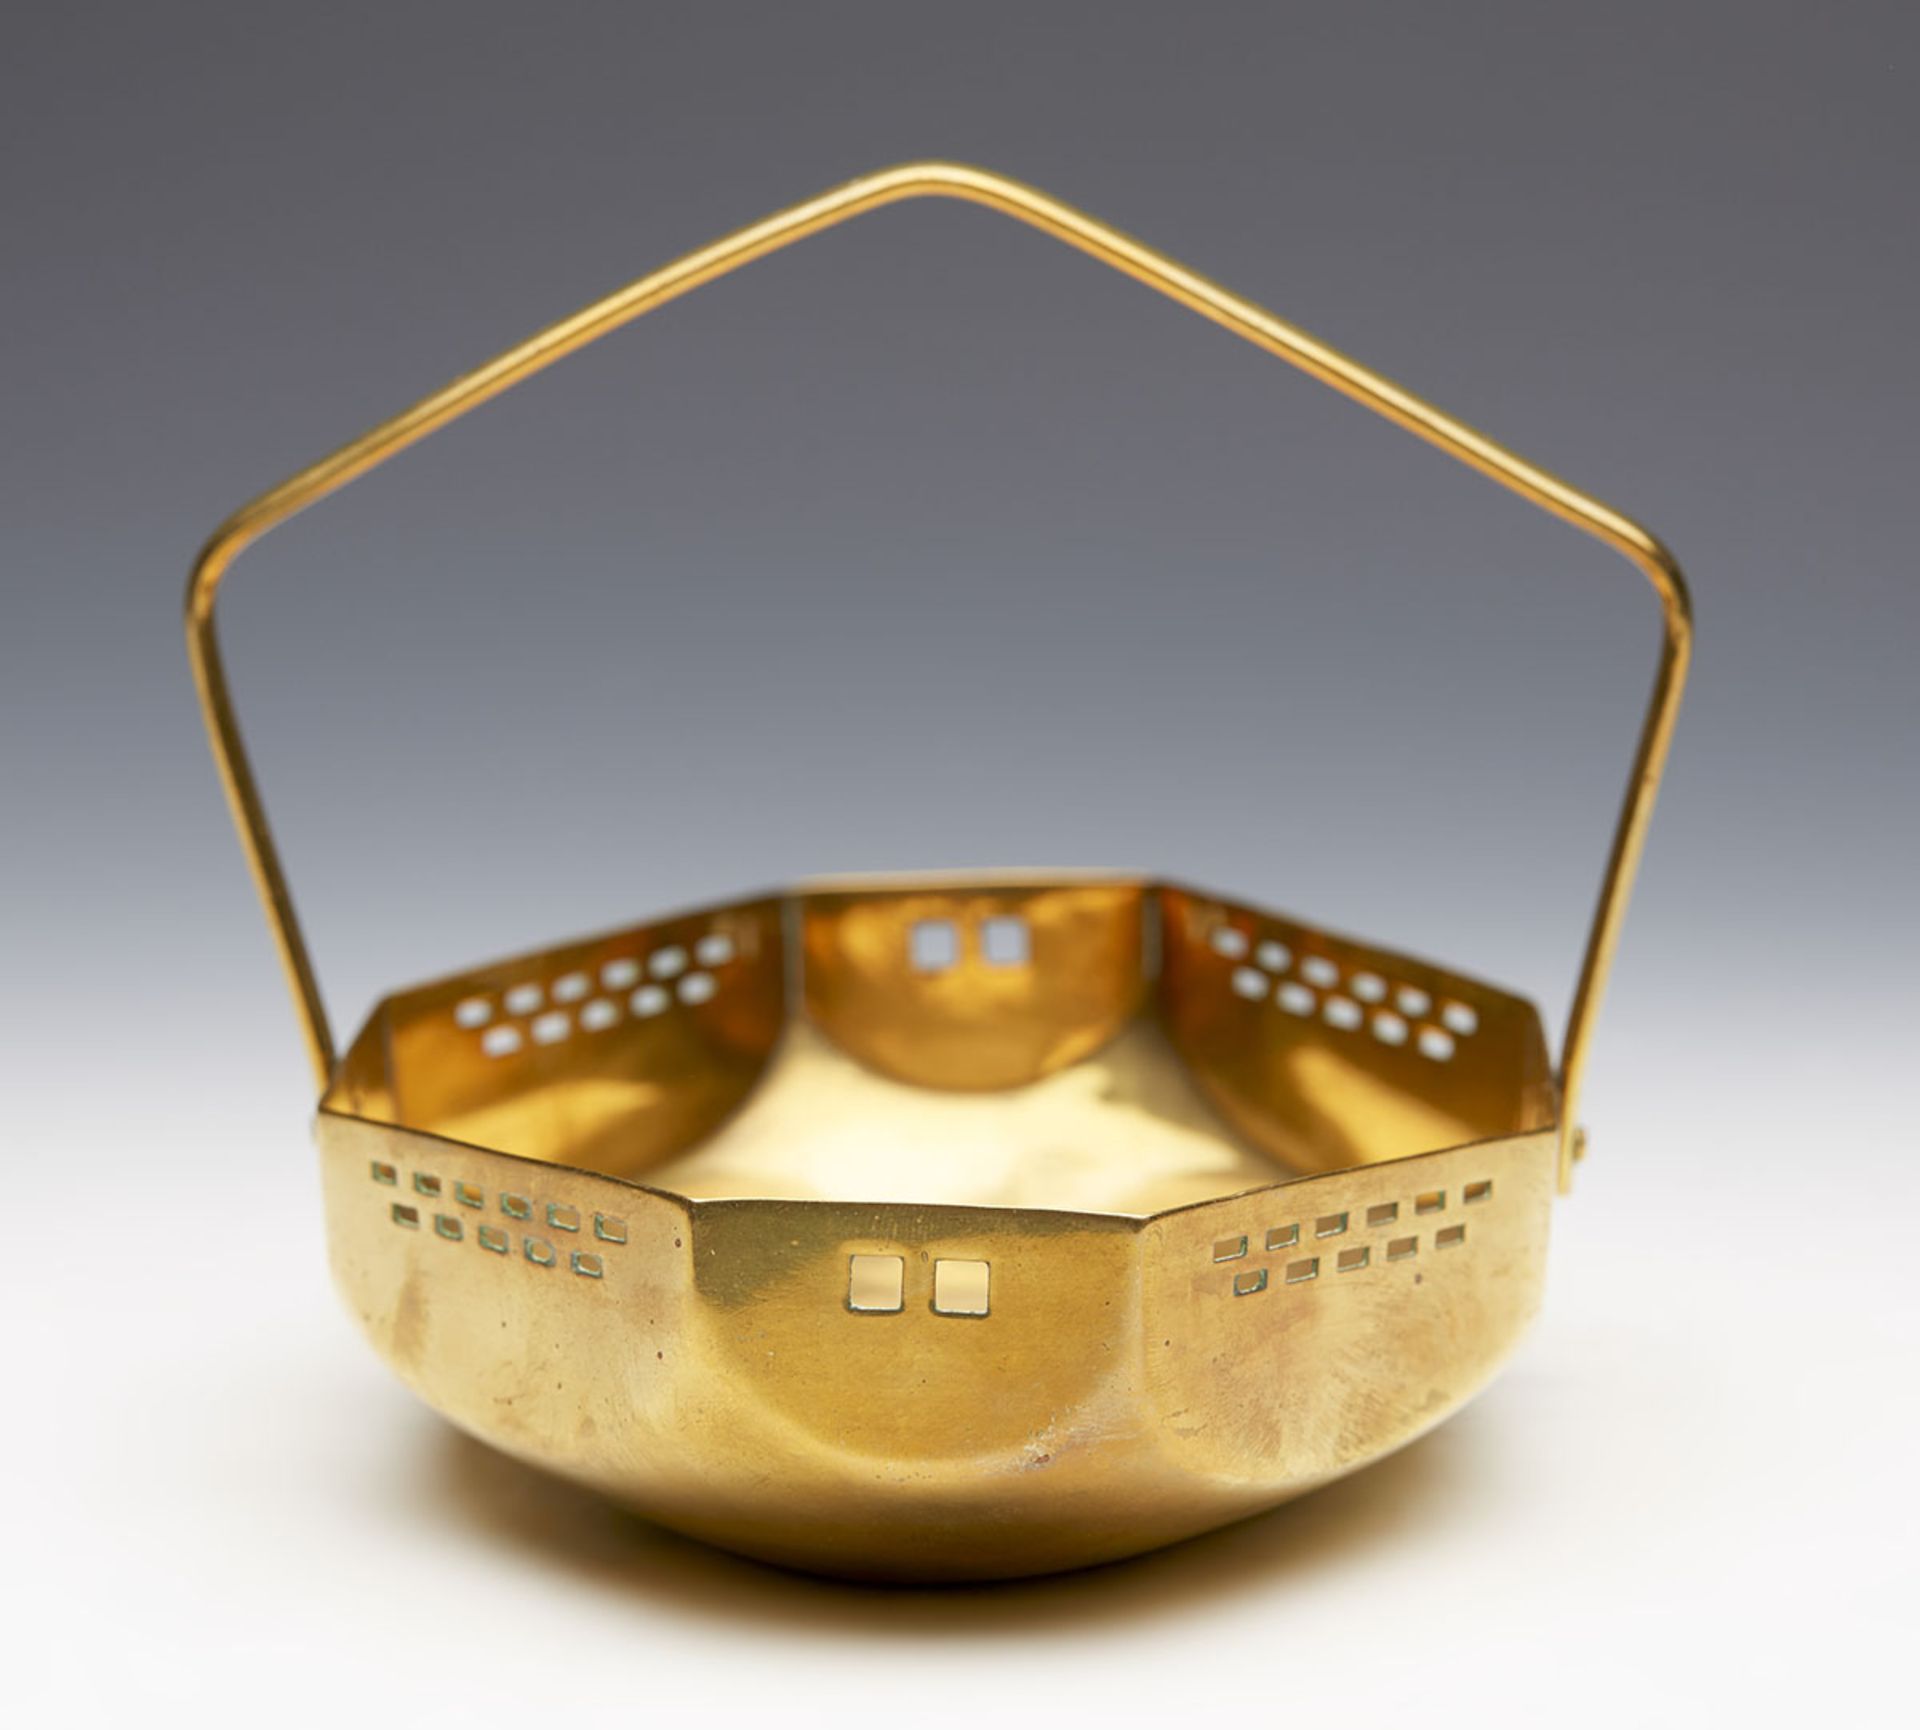 WMF SECESSIONIST HANDLED PIERCED BRASS BASKET c.1900   DIMENSIONS   Height 11,5cm, Length 17cm - Image 4 of 8